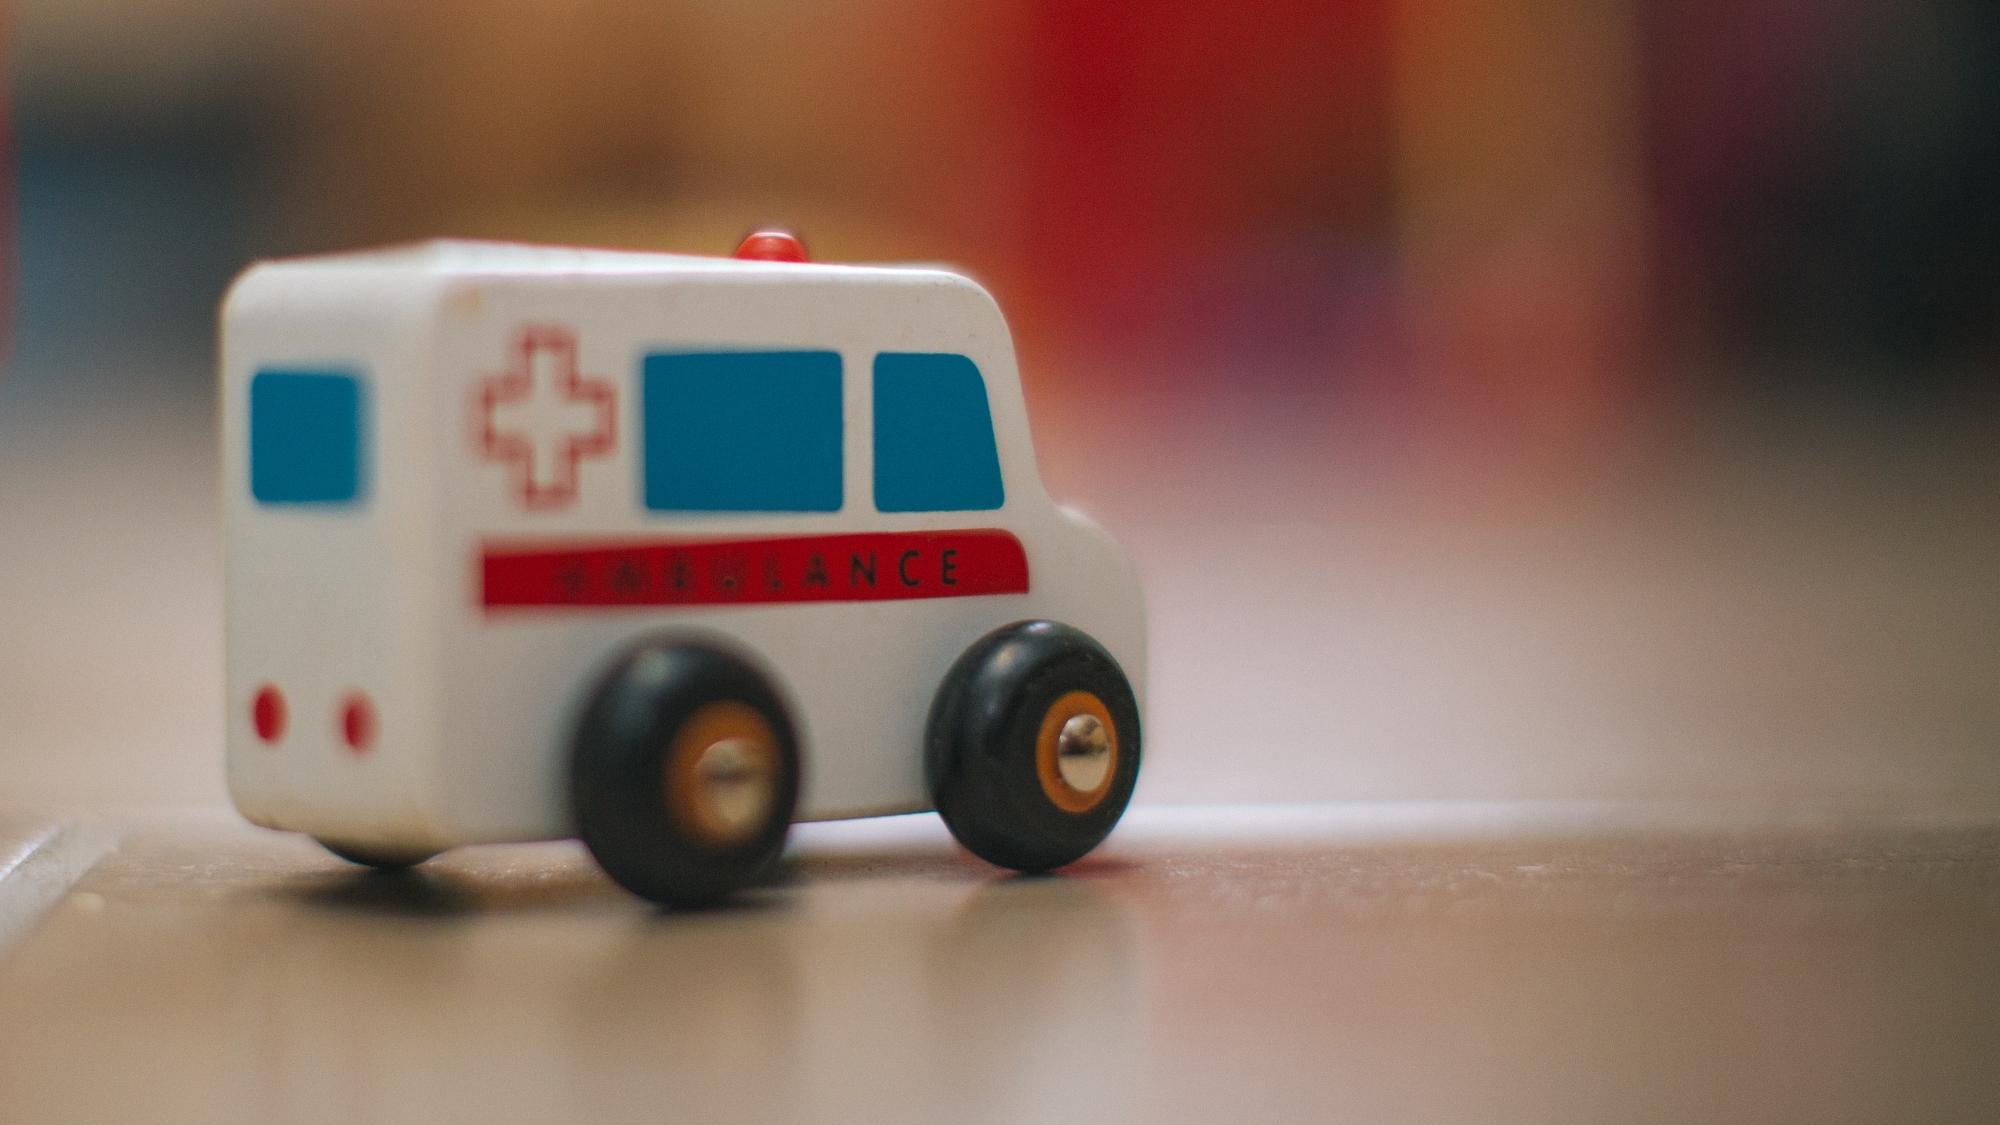 A model of an ambulance on a table